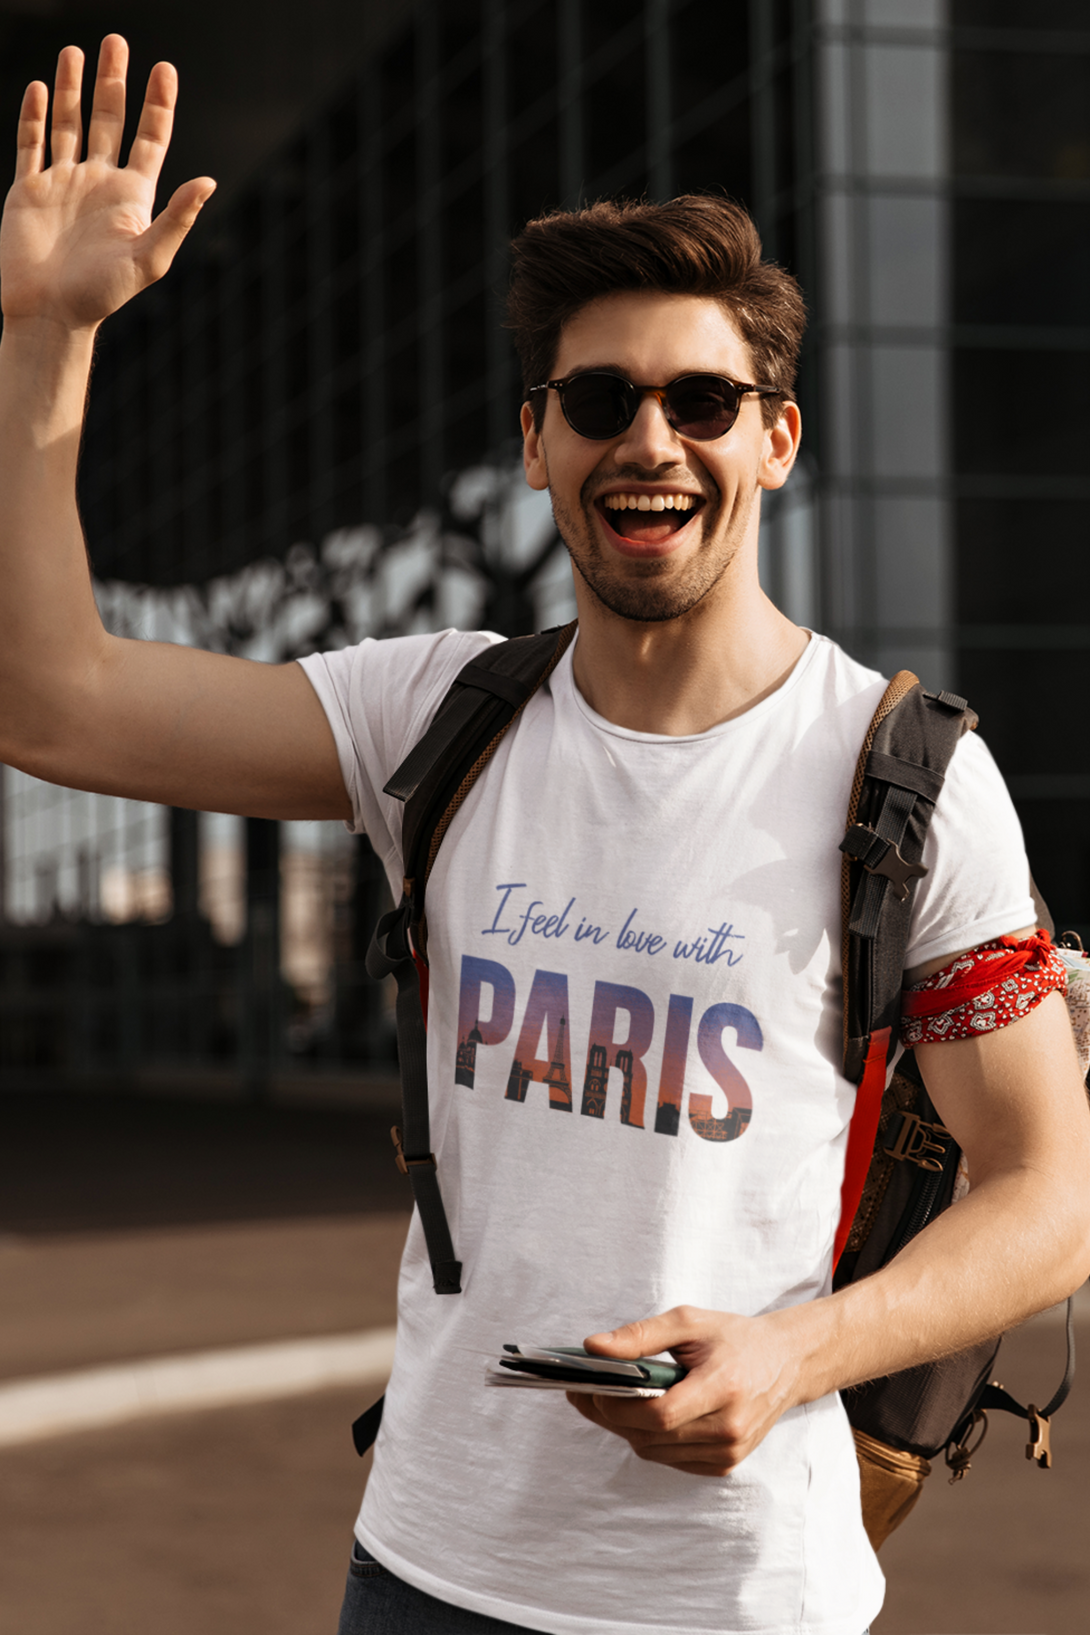 In Love With Paris Printed T-Shirt For Men - WowWaves - 2